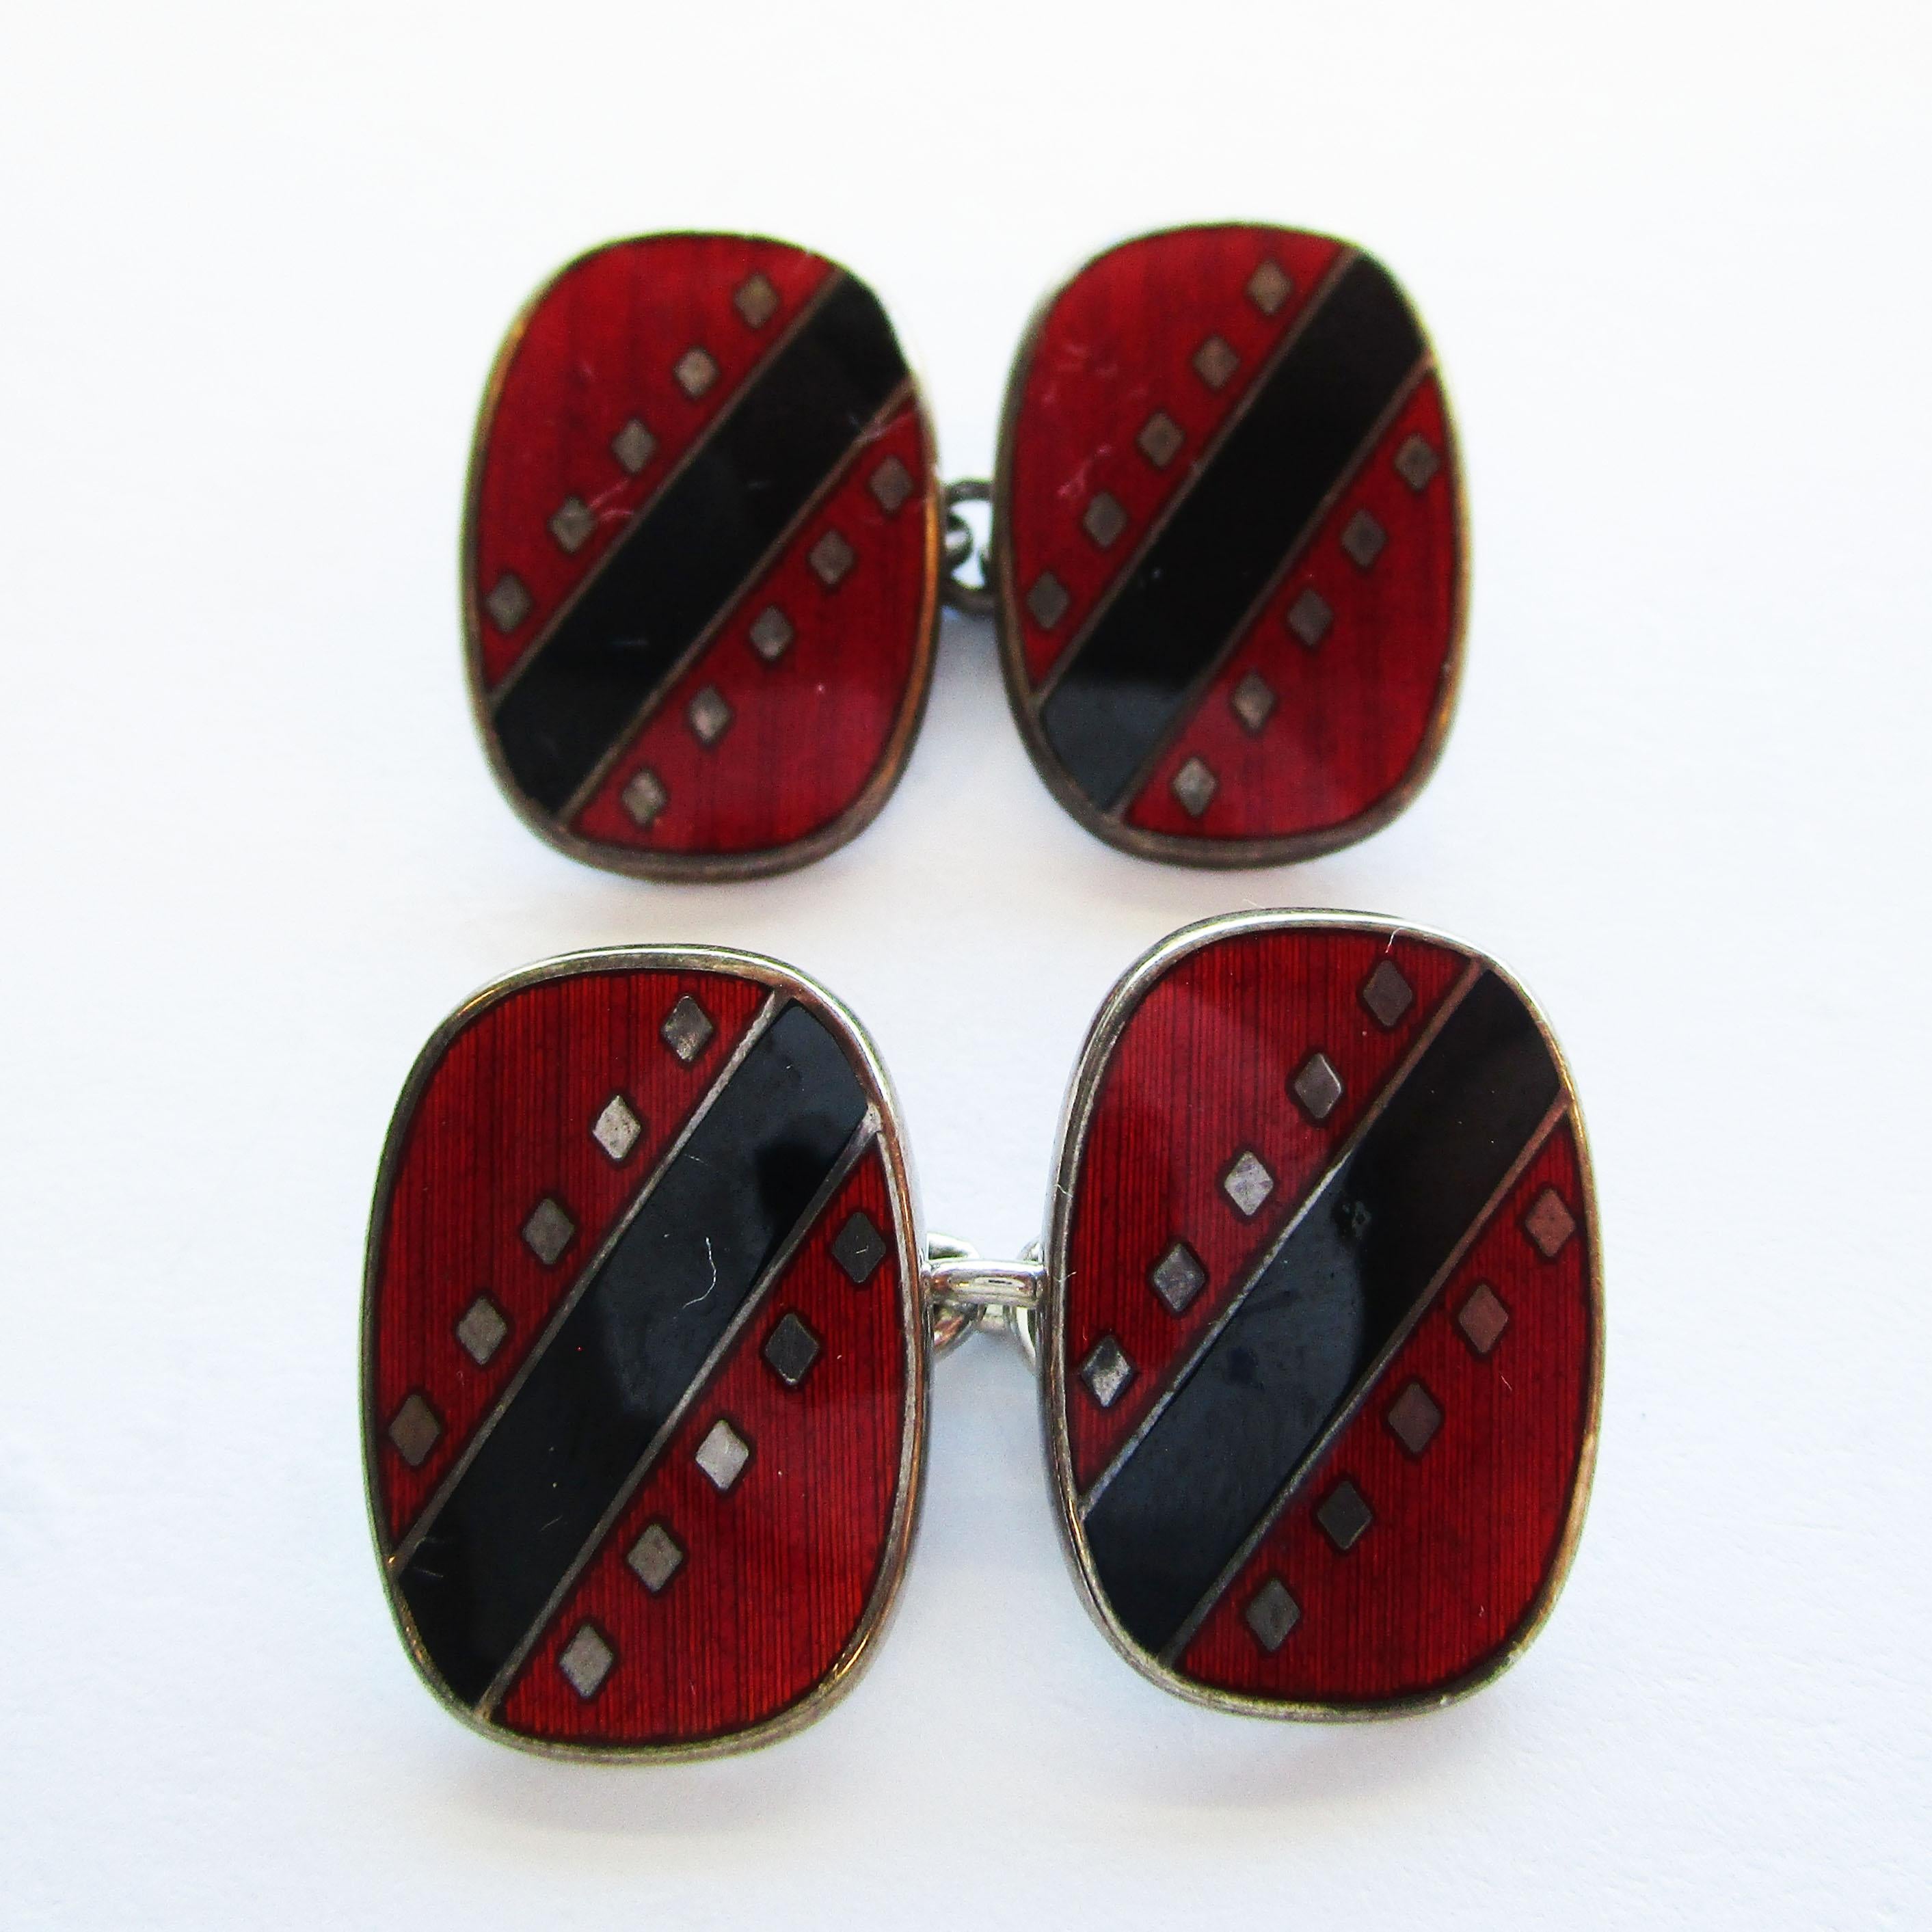 This fantastic pair of cufflinks is in sterling silver and features stunning red and black enamel. The subtle linear design of the enamel is made dramatic in rich red and deep black, and works to create a classic and elegant look that should be a